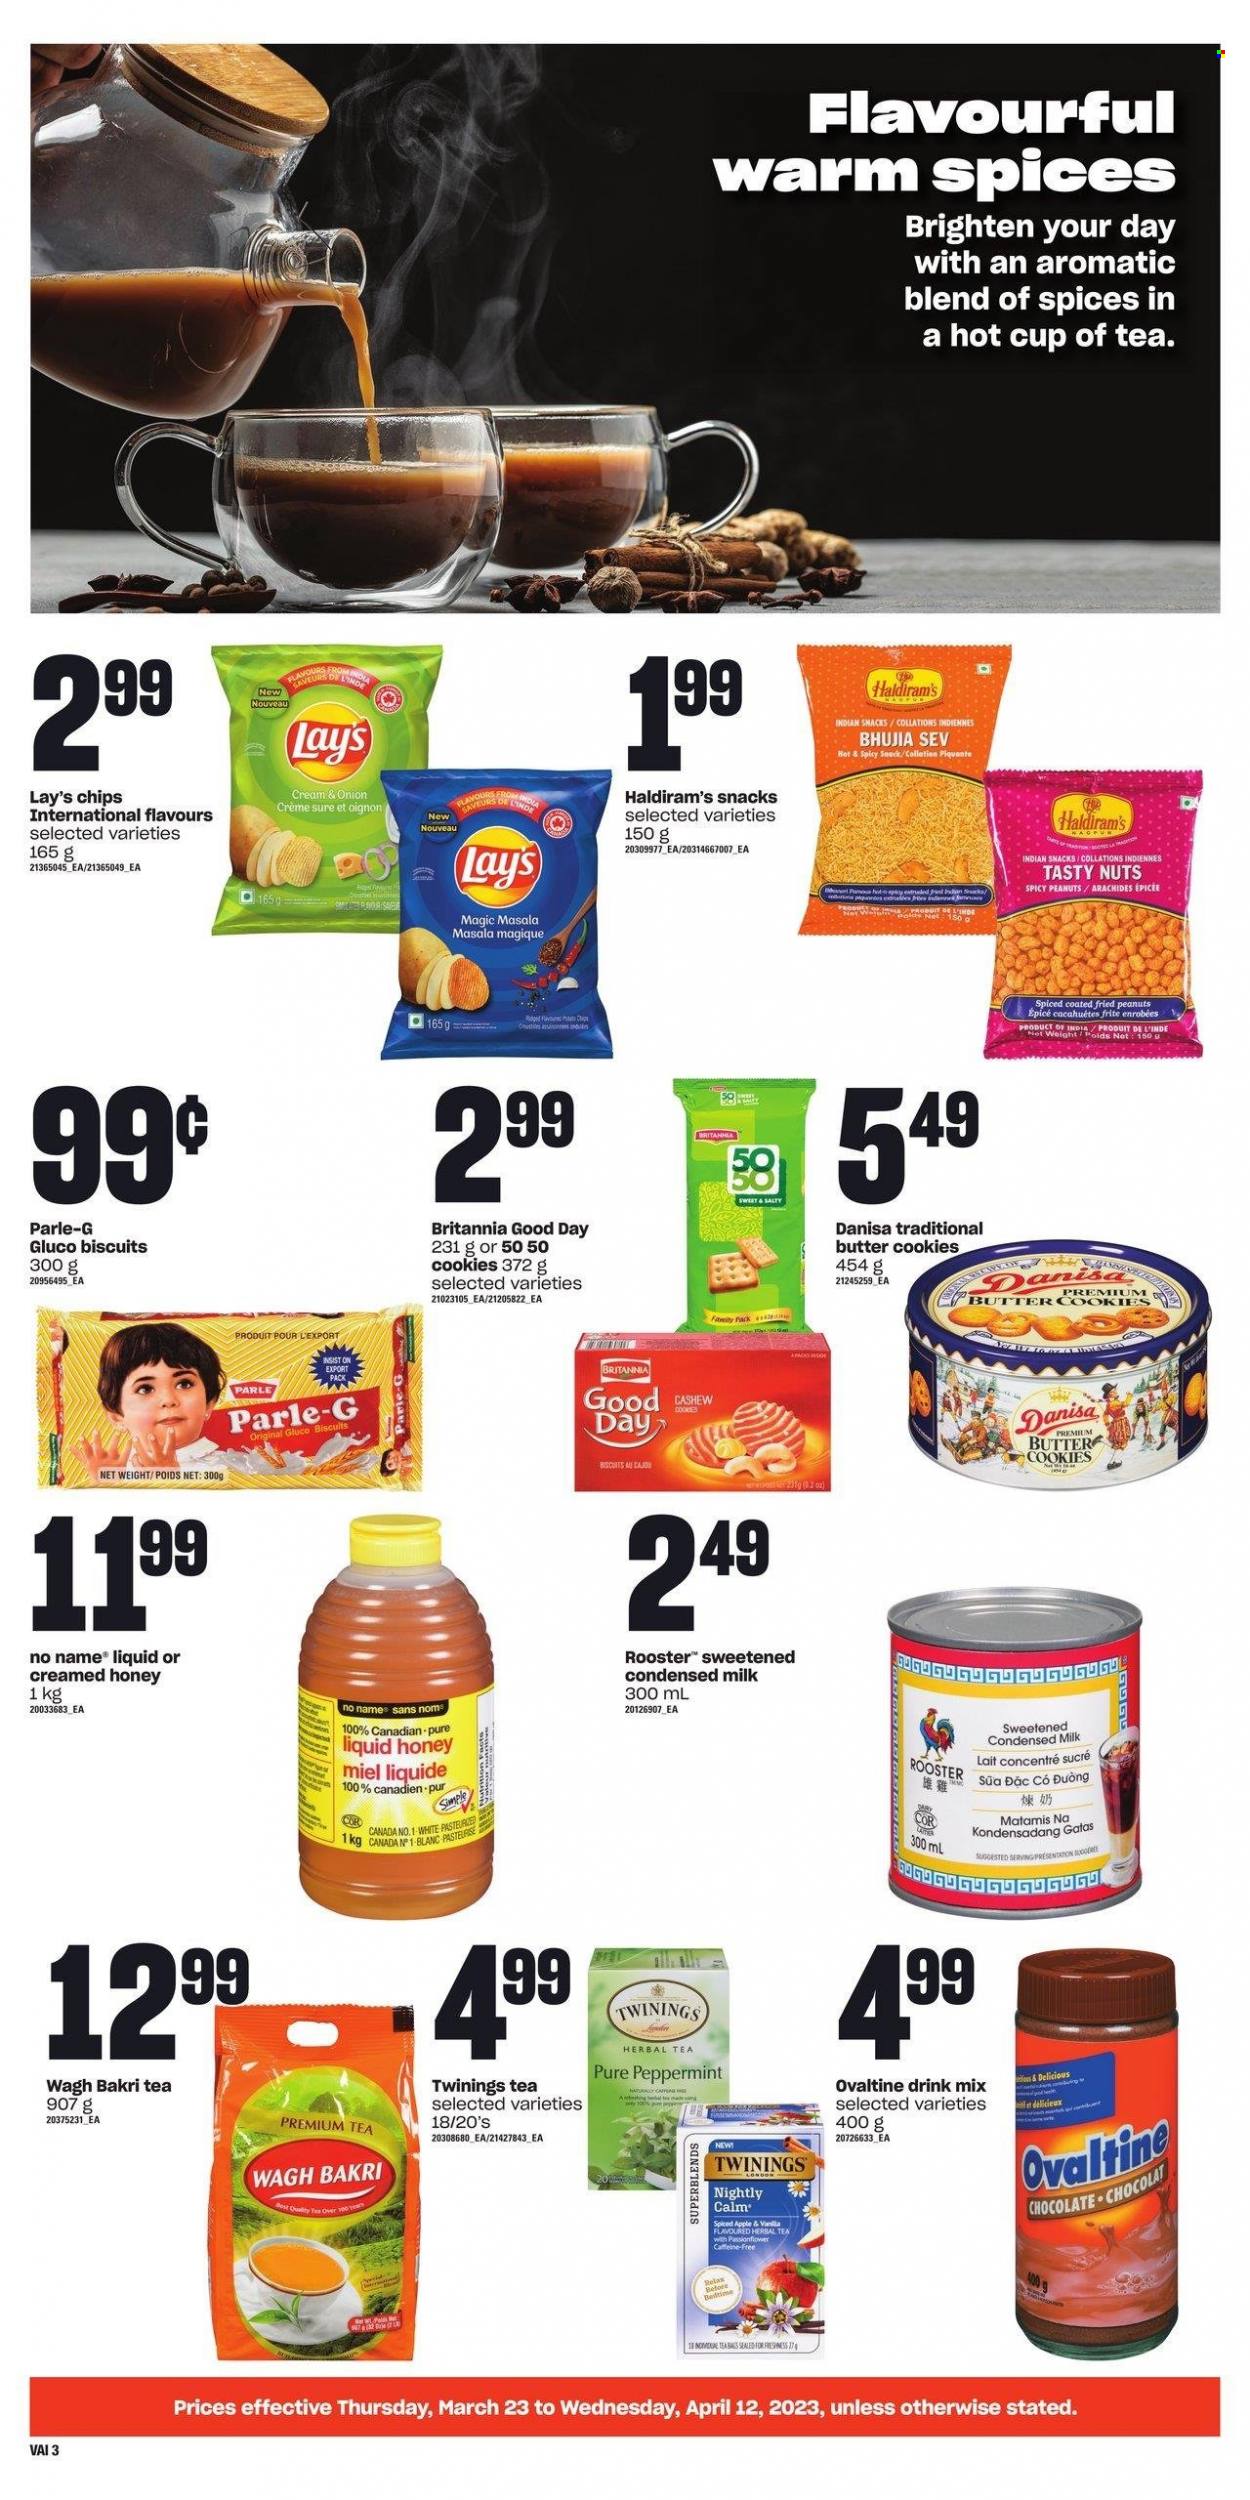 thumbnail - Loblaws Flyer - March 23, 2023 - April 12, 2023 - Sales products - No Name, condensed milk, cookies, chocolate, butter cookies, snack, biscuit, Parle, chips, Lay’s, bhujia, honey, peanuts, tea, herbal tea, Twinings, DAC, Sure. Page 3.